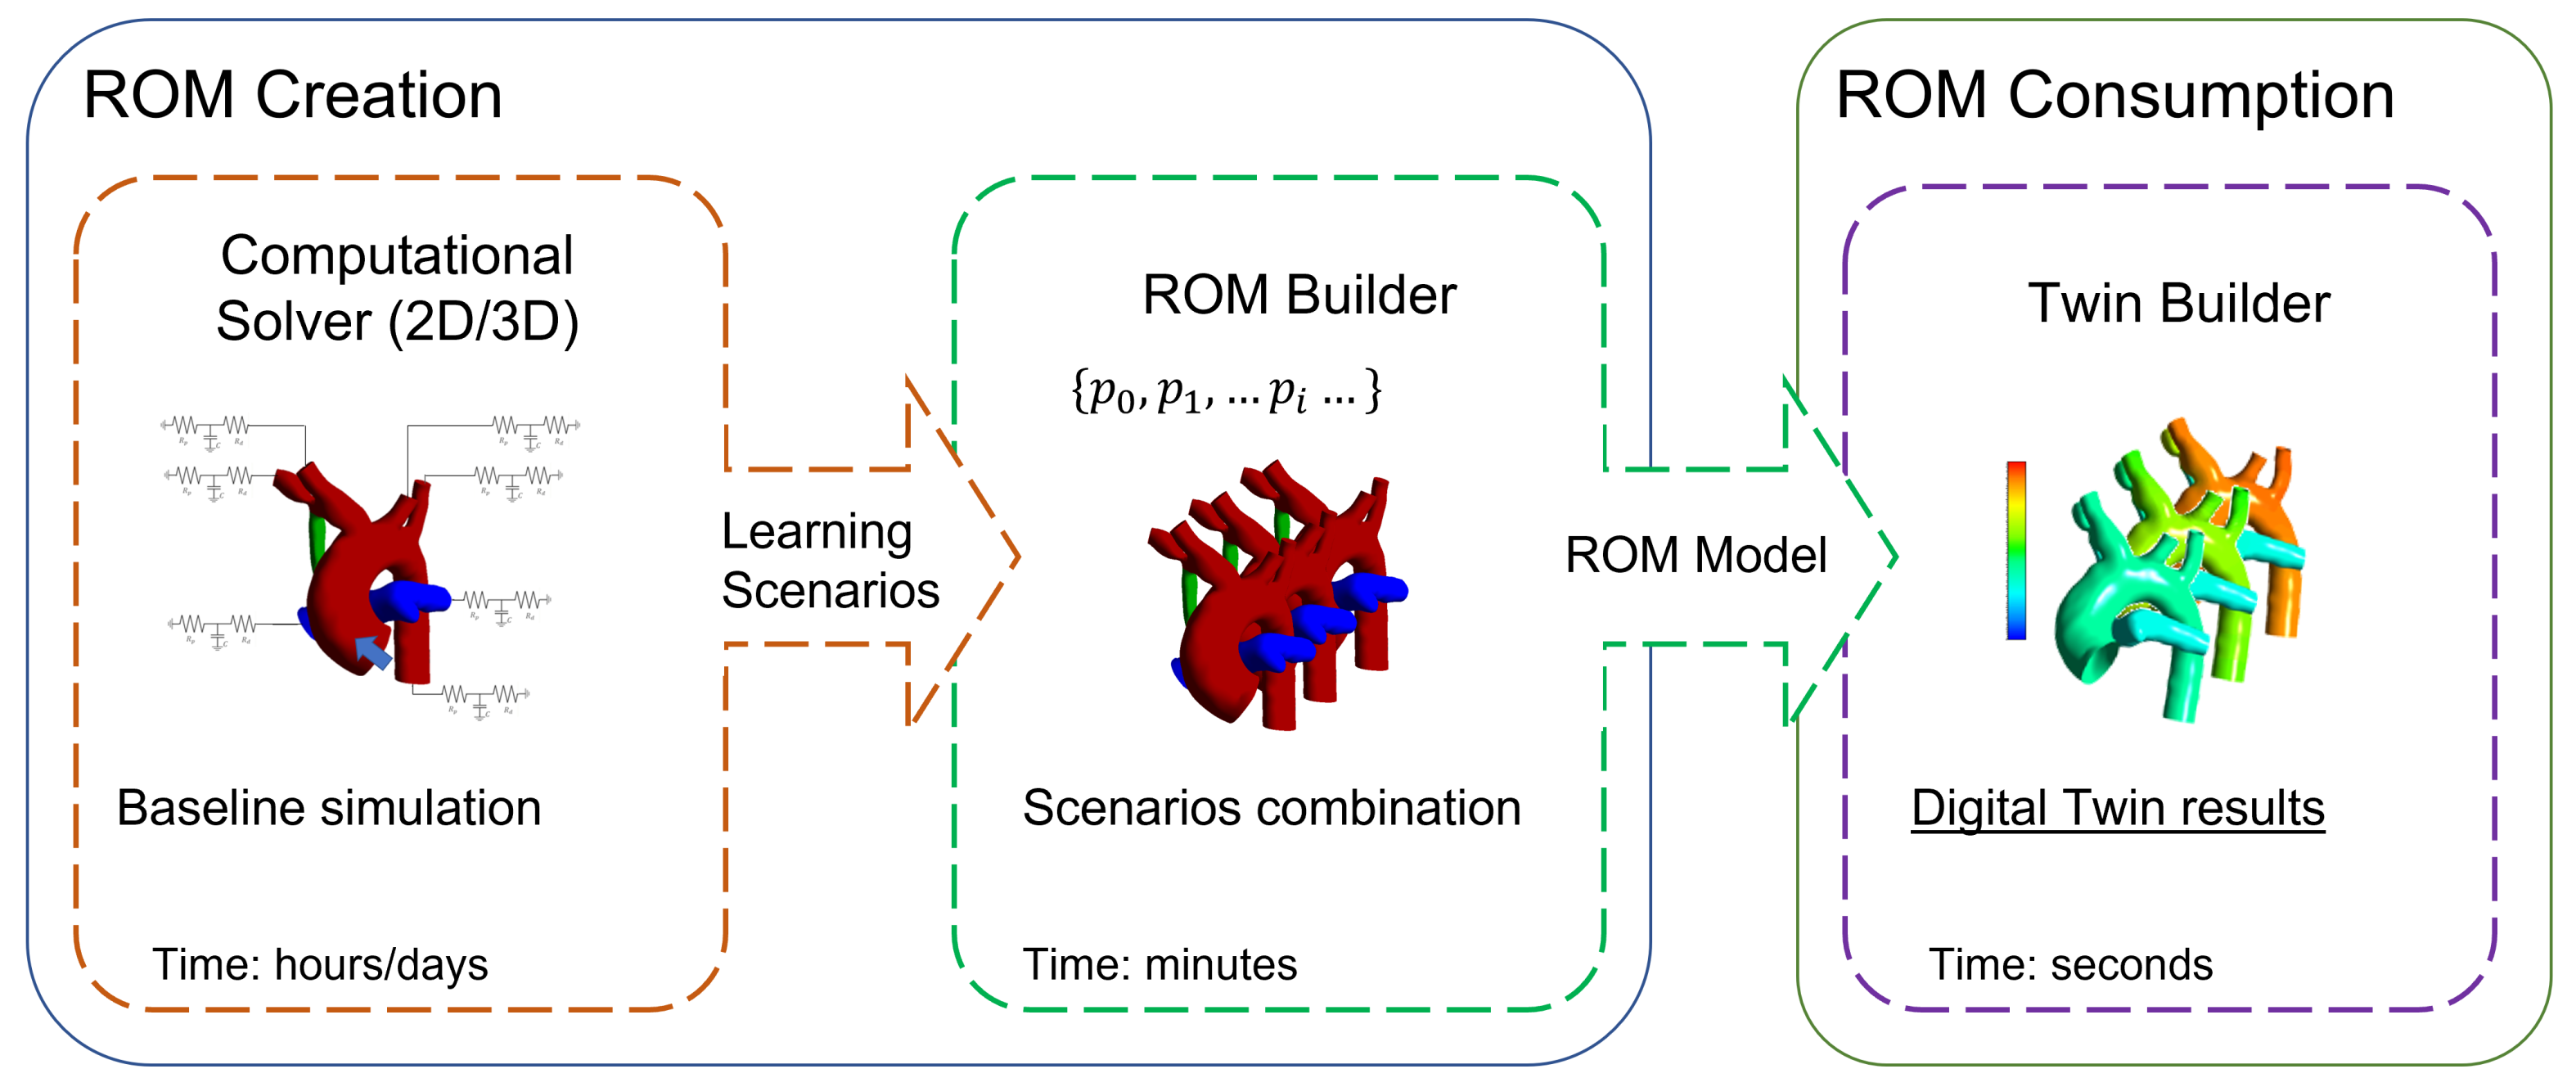 Parametric ROMs (Reduced-Order Models) from Fluent steady state